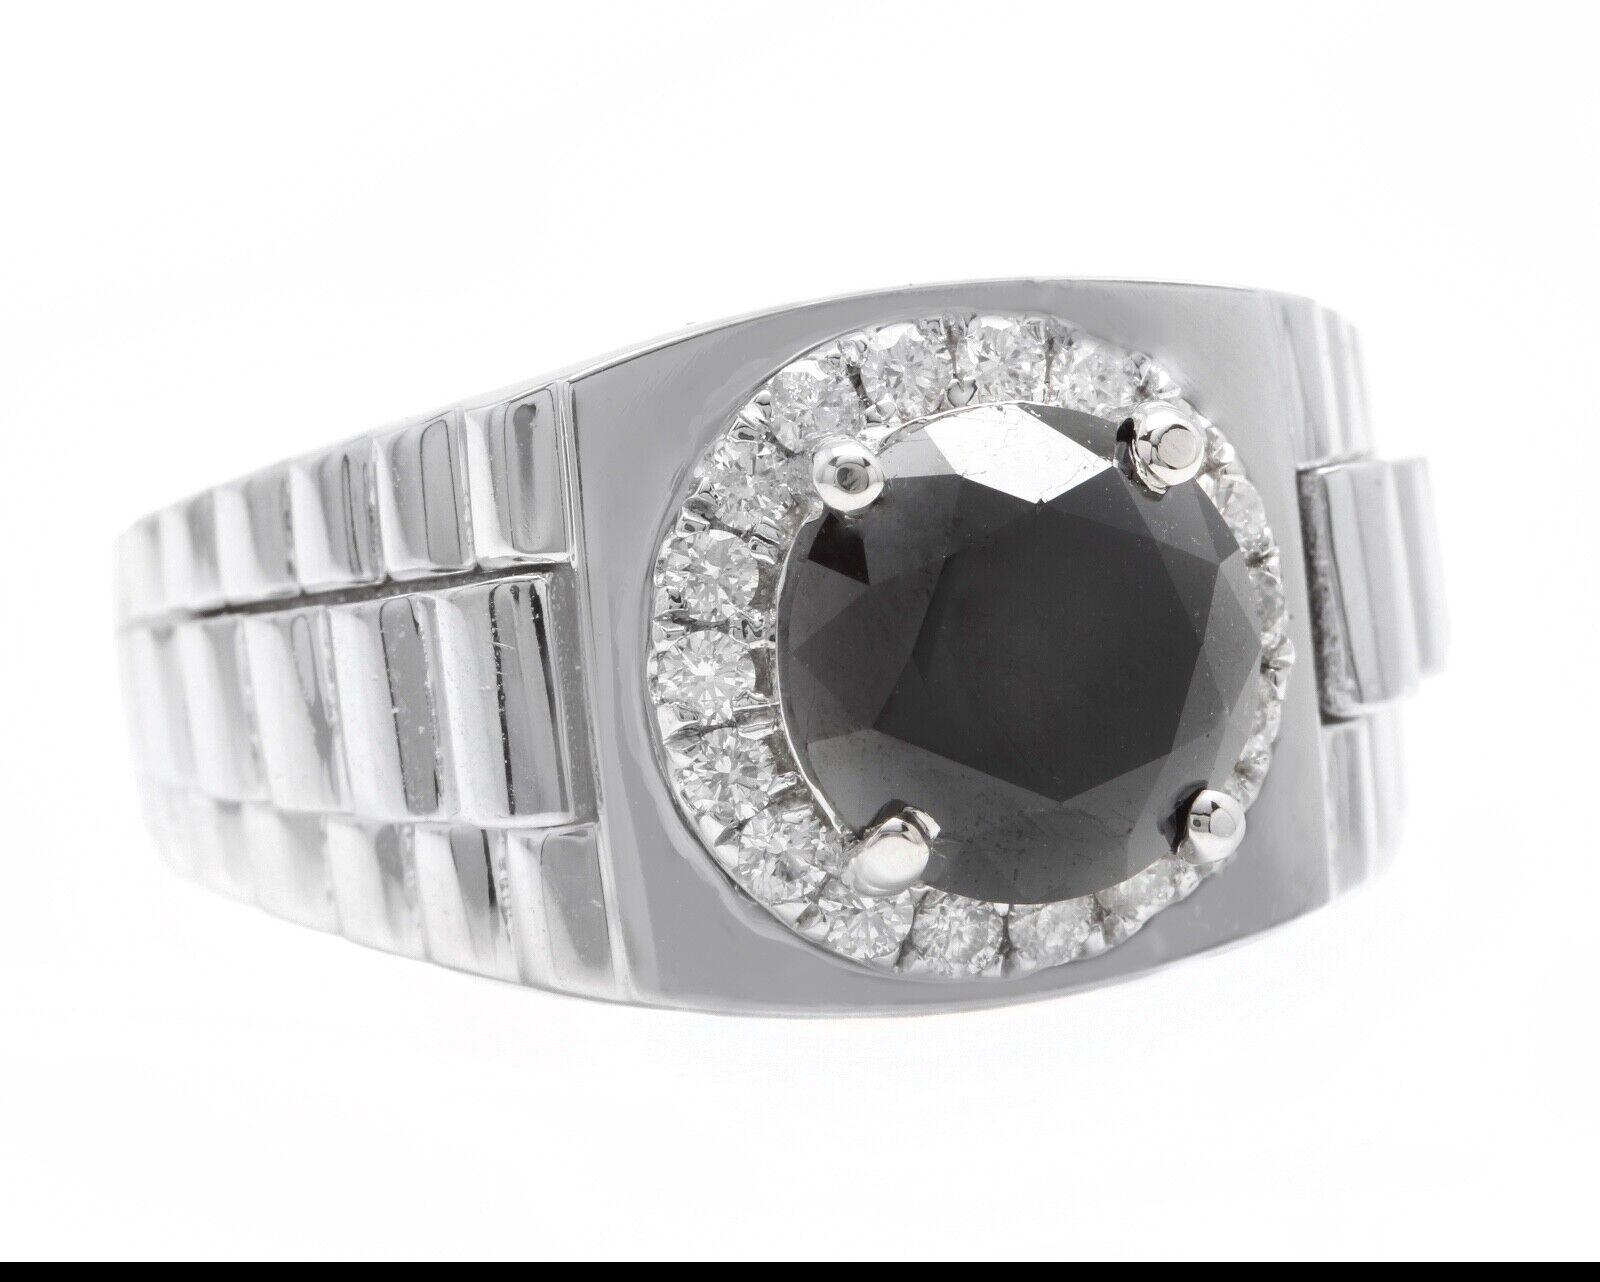 3.35Ct Natural Black & White Diamond Men's Ring in 14K Solid White Gold

Amazing looking piece!

Suggested Replacement Value: $8,000.00

Total Natural Round Cut Black Diamond Weight: Approx. 3.00 Carats 

Center Black Diamond Treatment: Heat,